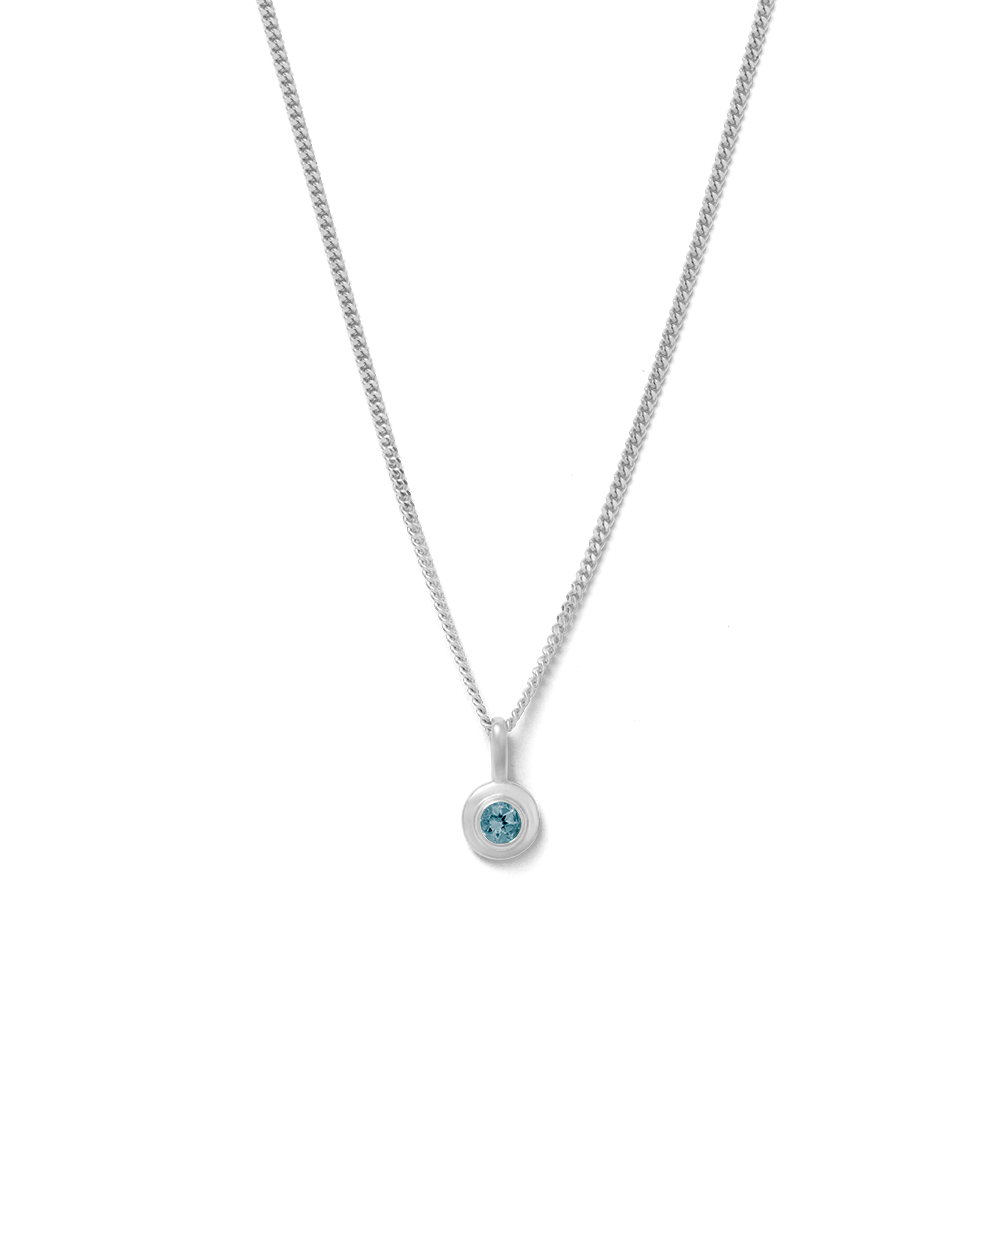 Beeghly & Co. Sterling Silver 5 Birthstone Necklace 86927